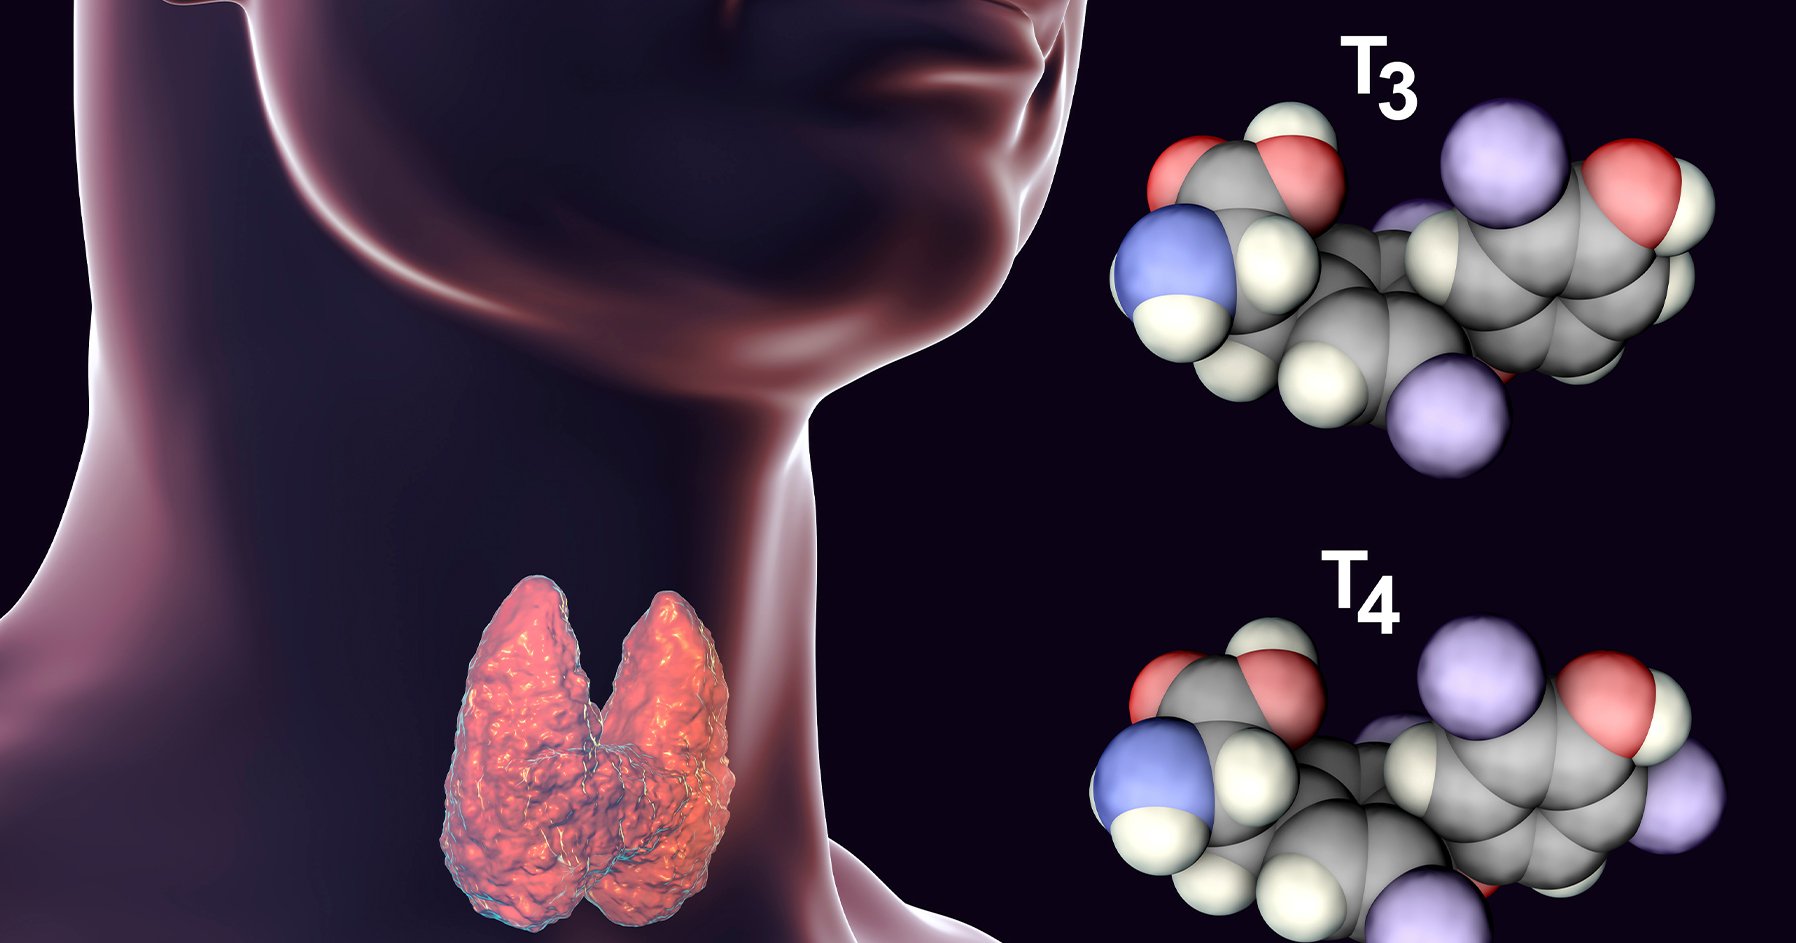 Image of thyroid and T3 and T4 hormones